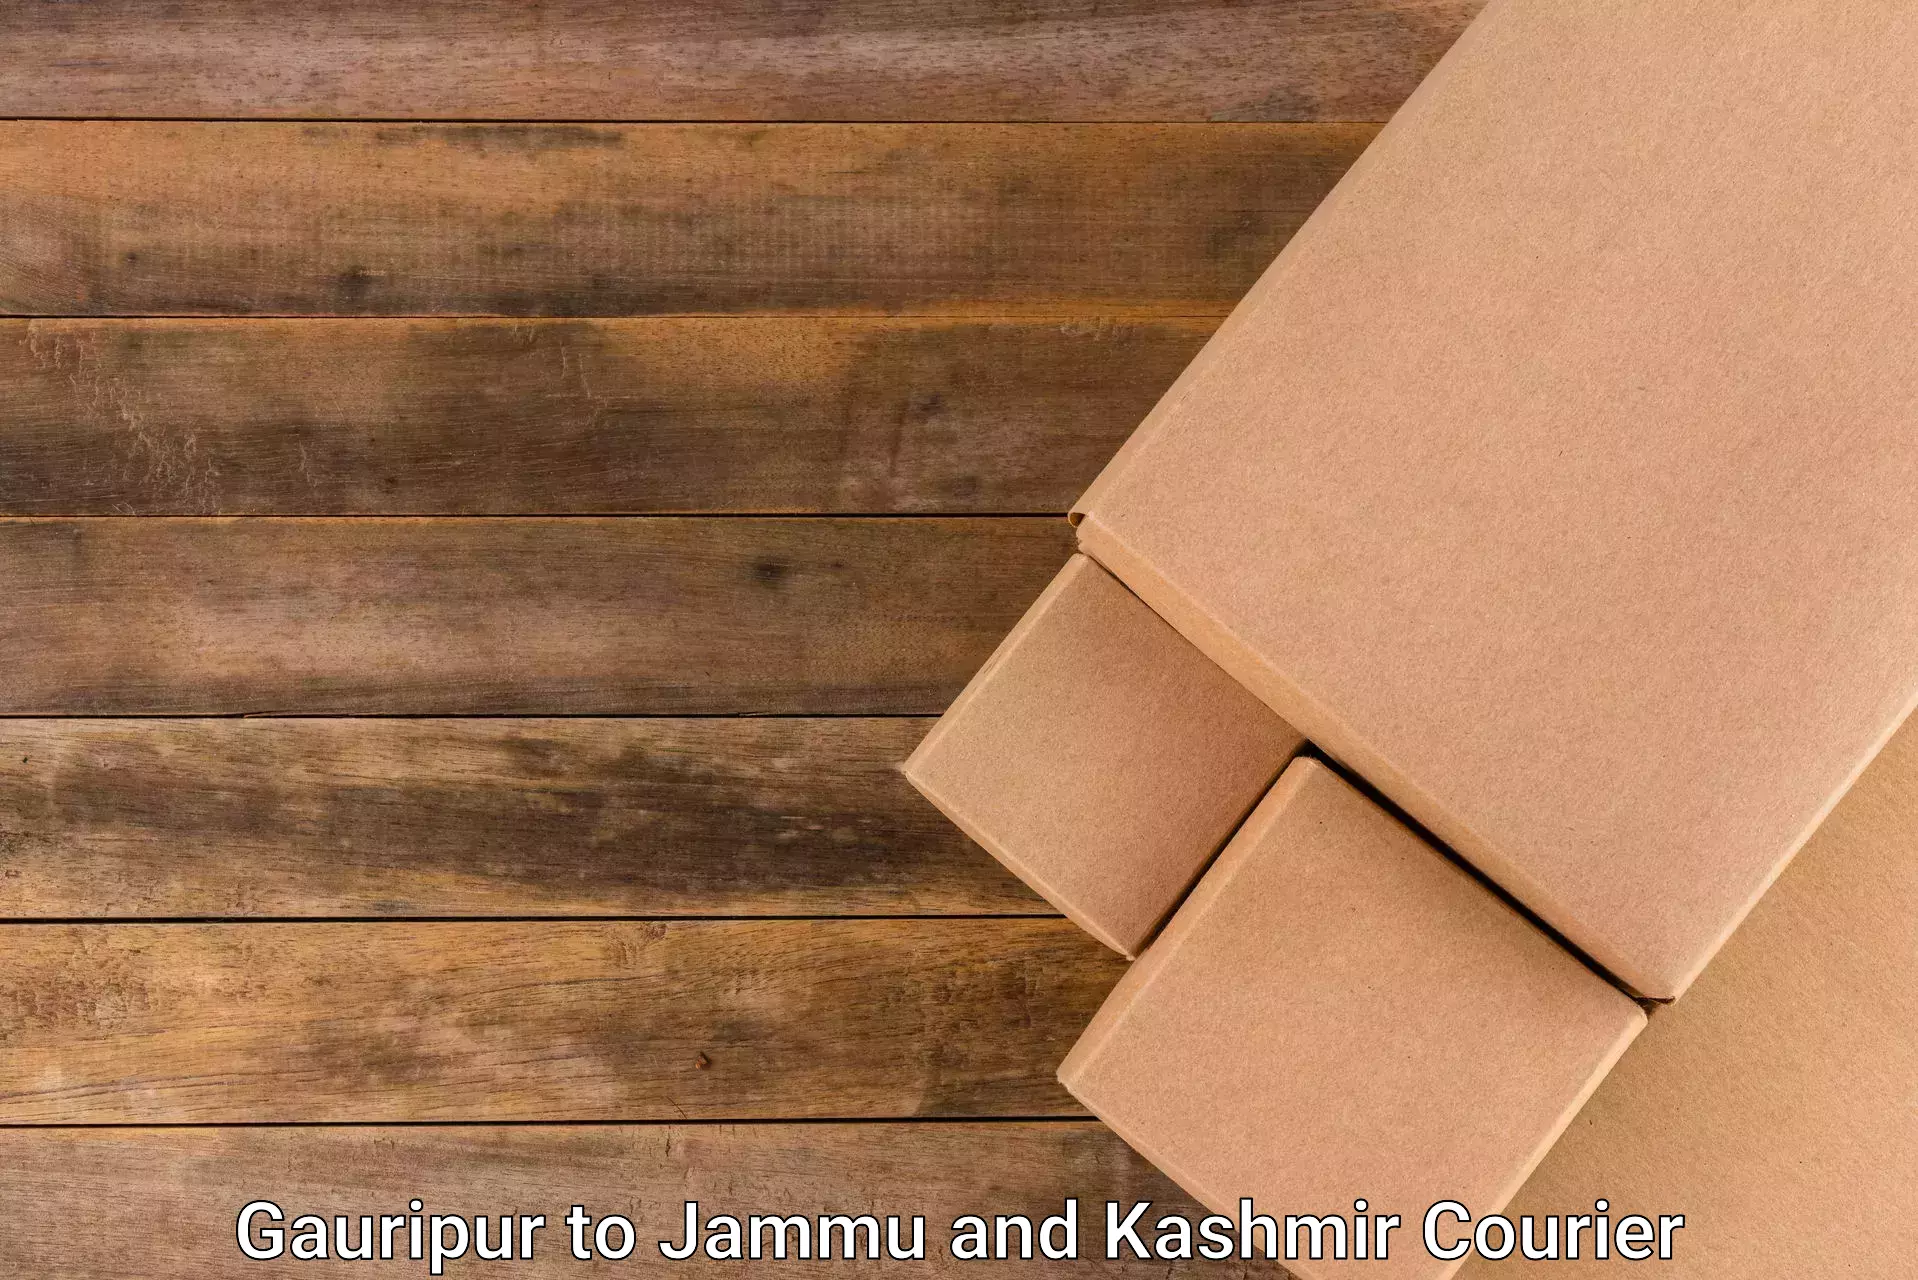 Same-day delivery solutions Gauripur to Pulwama